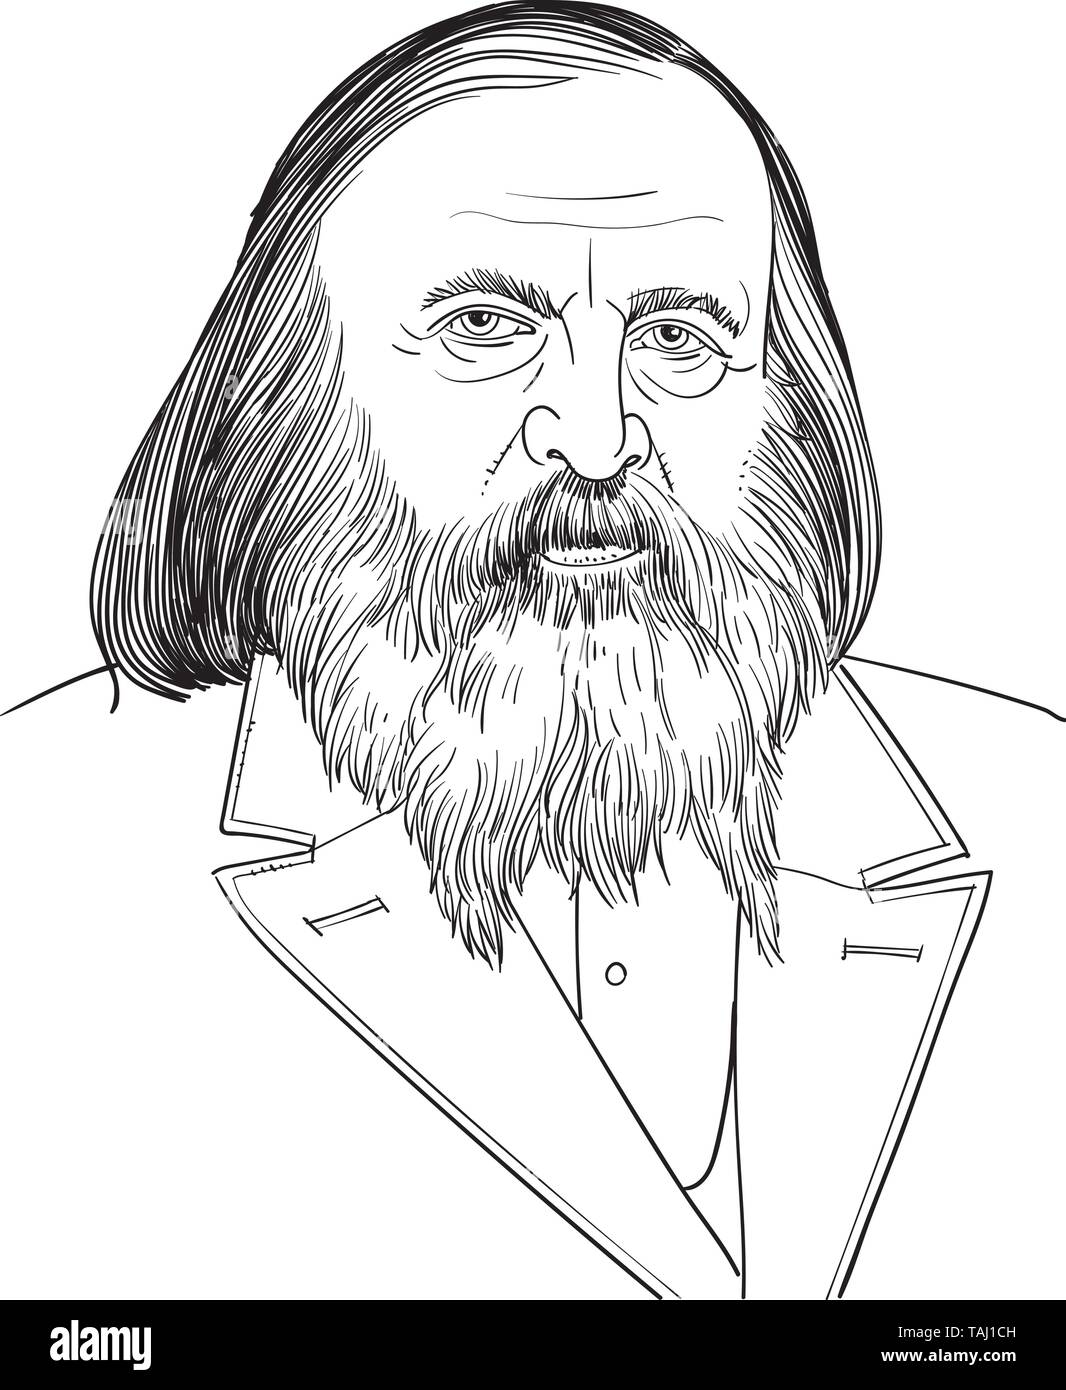 Dmitri Mendeleev (1834-1907) portrait in line art illustration. He was a Russian chemist who developed the periodic classification of the elements. Stock Vector